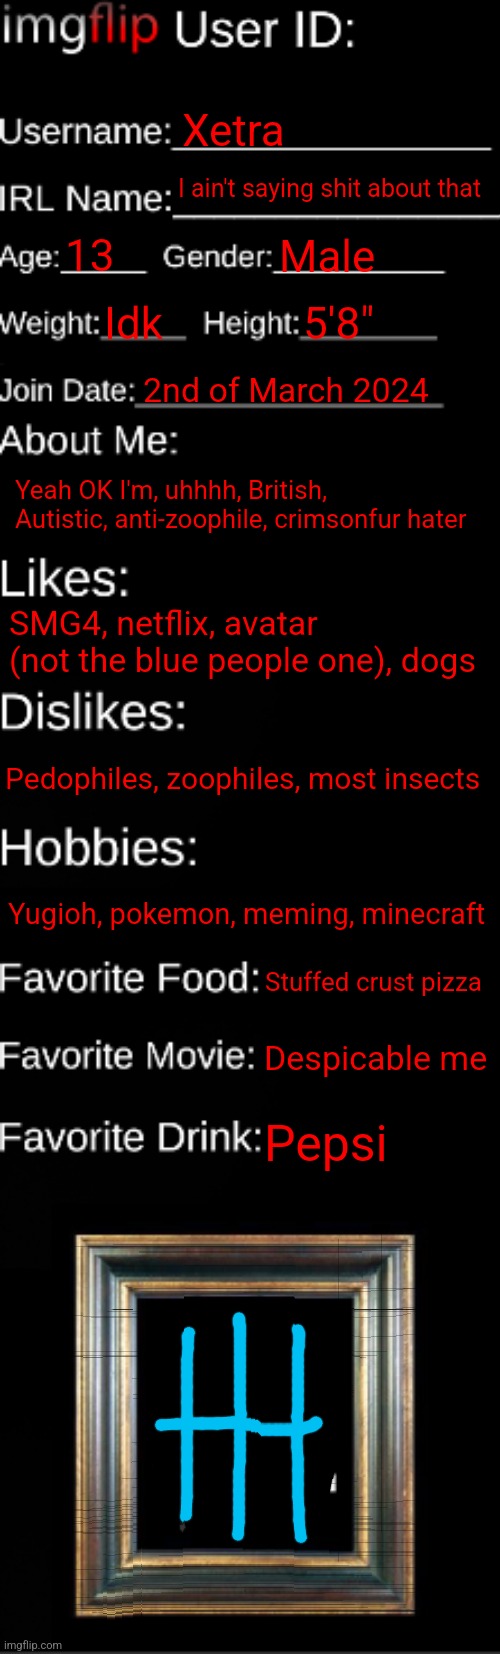 imgflip ID Card | Xetra; I ain't saying shit about that; 13; Male; Idk; 5'8"; 2nd of March 2024; Yeah OK I'm, uhhhh, British, Autistic, anti-zoophile, crimsonfur hater; SMG4, netflix, avatar (not the blue people one), dogs; Pedophiles, zoophiles, most insects; Yugioh, pokemon, meming, minecraft; Stuffed crust pizza; Despicable me; Pepsi | image tagged in imgflip id card | made w/ Imgflip meme maker